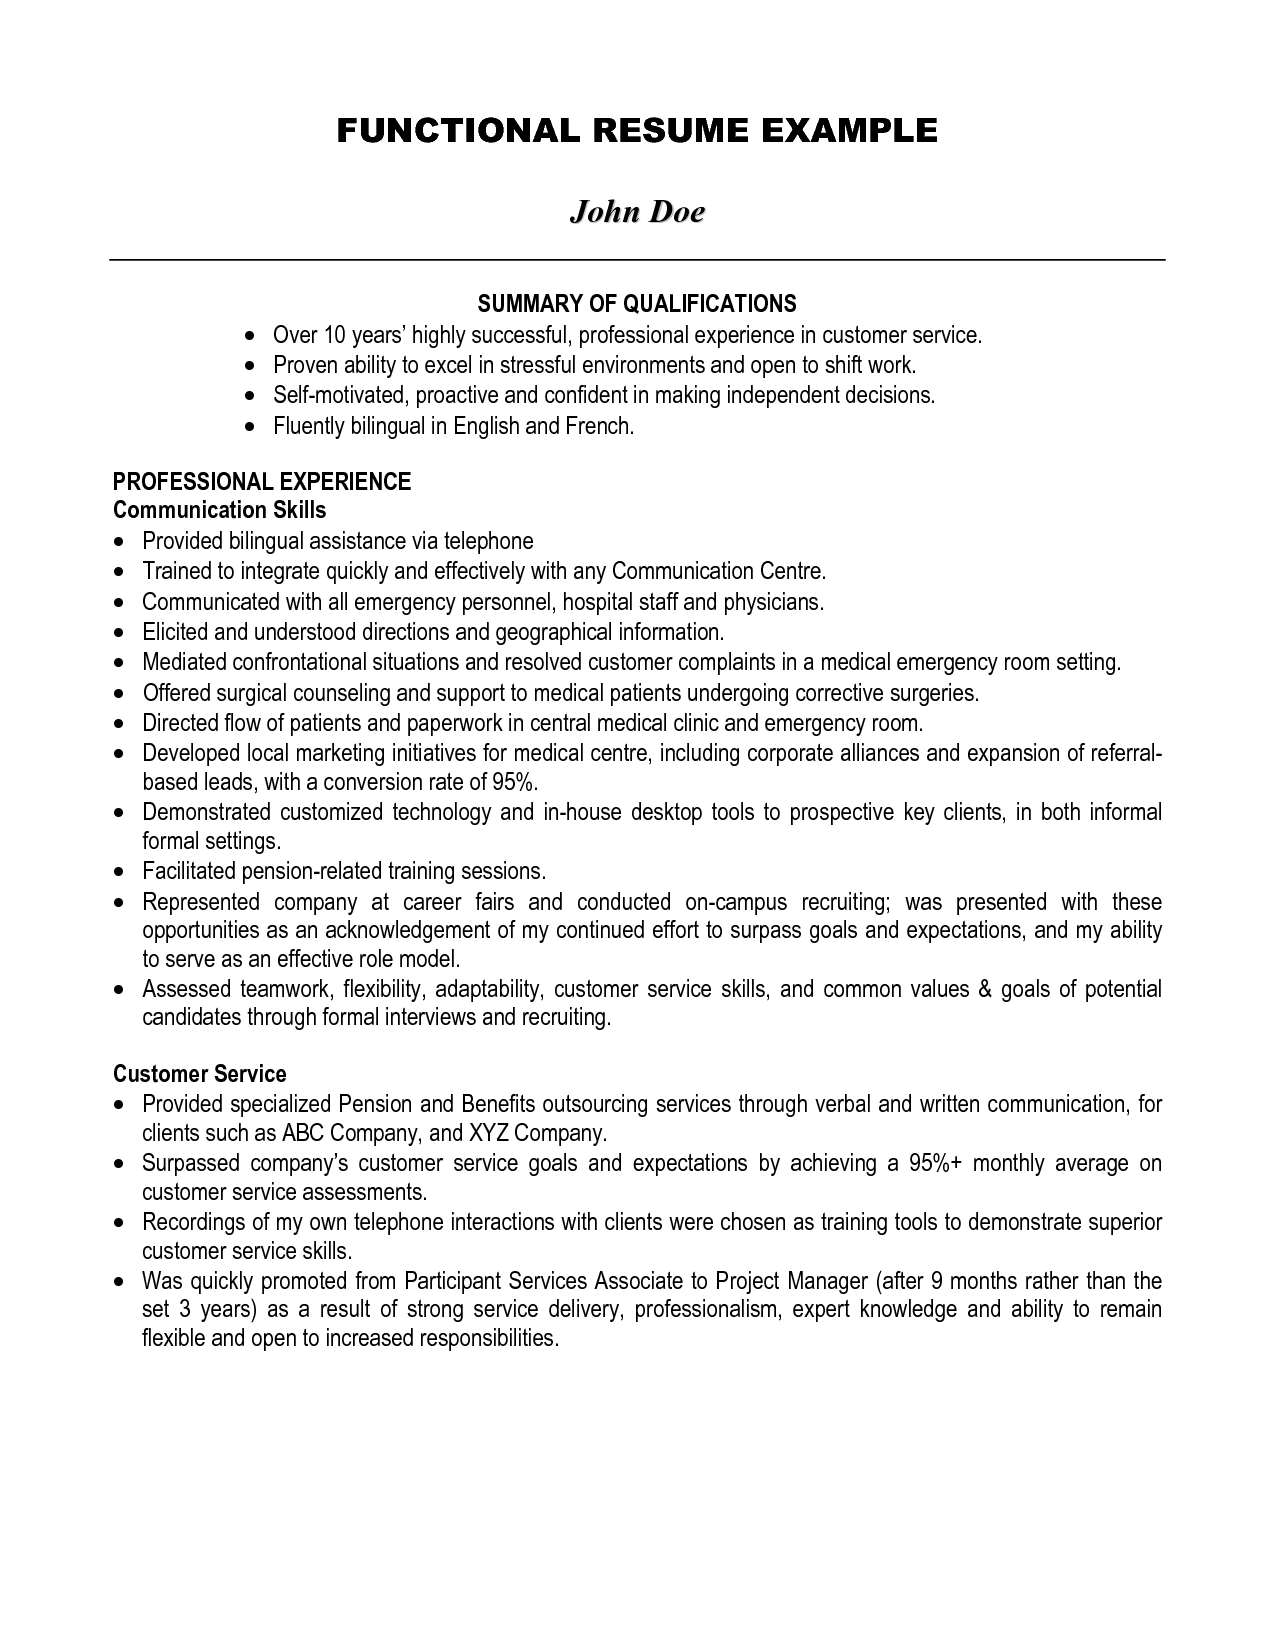 Sample Summary Of Carrier / Sample Resume for a Midlevel IT Project